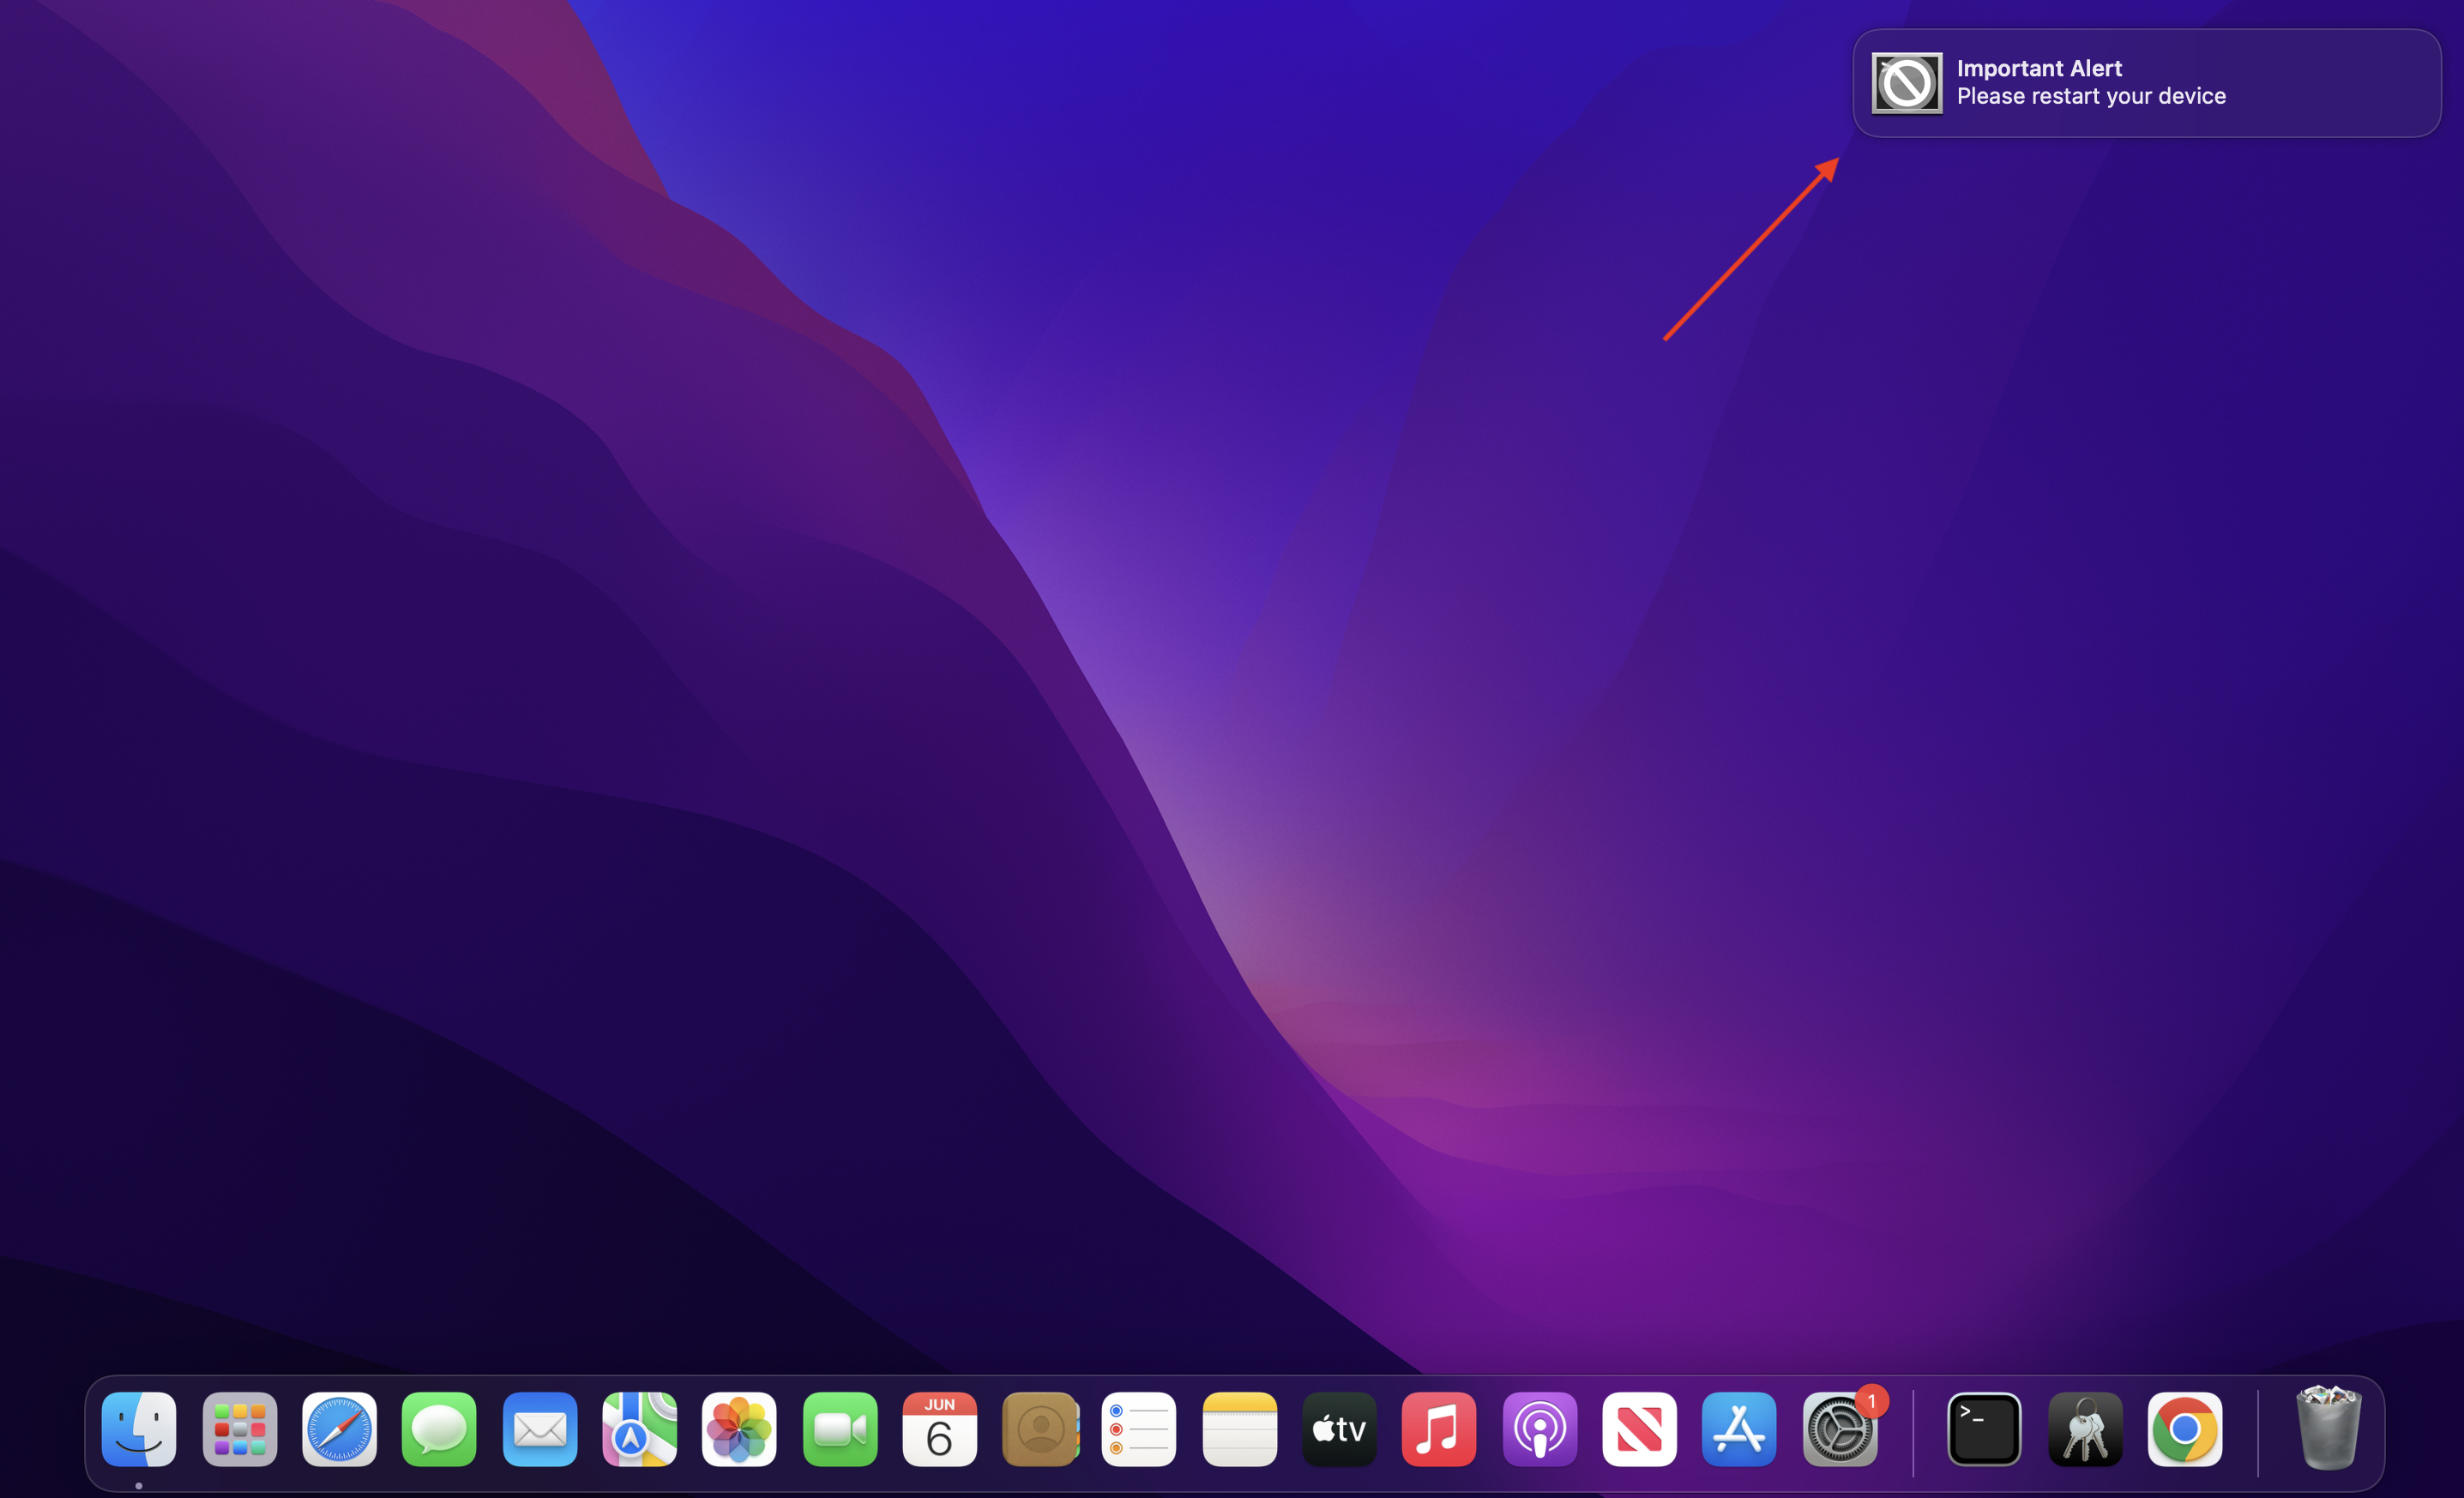 Display custom notification on macOS devices